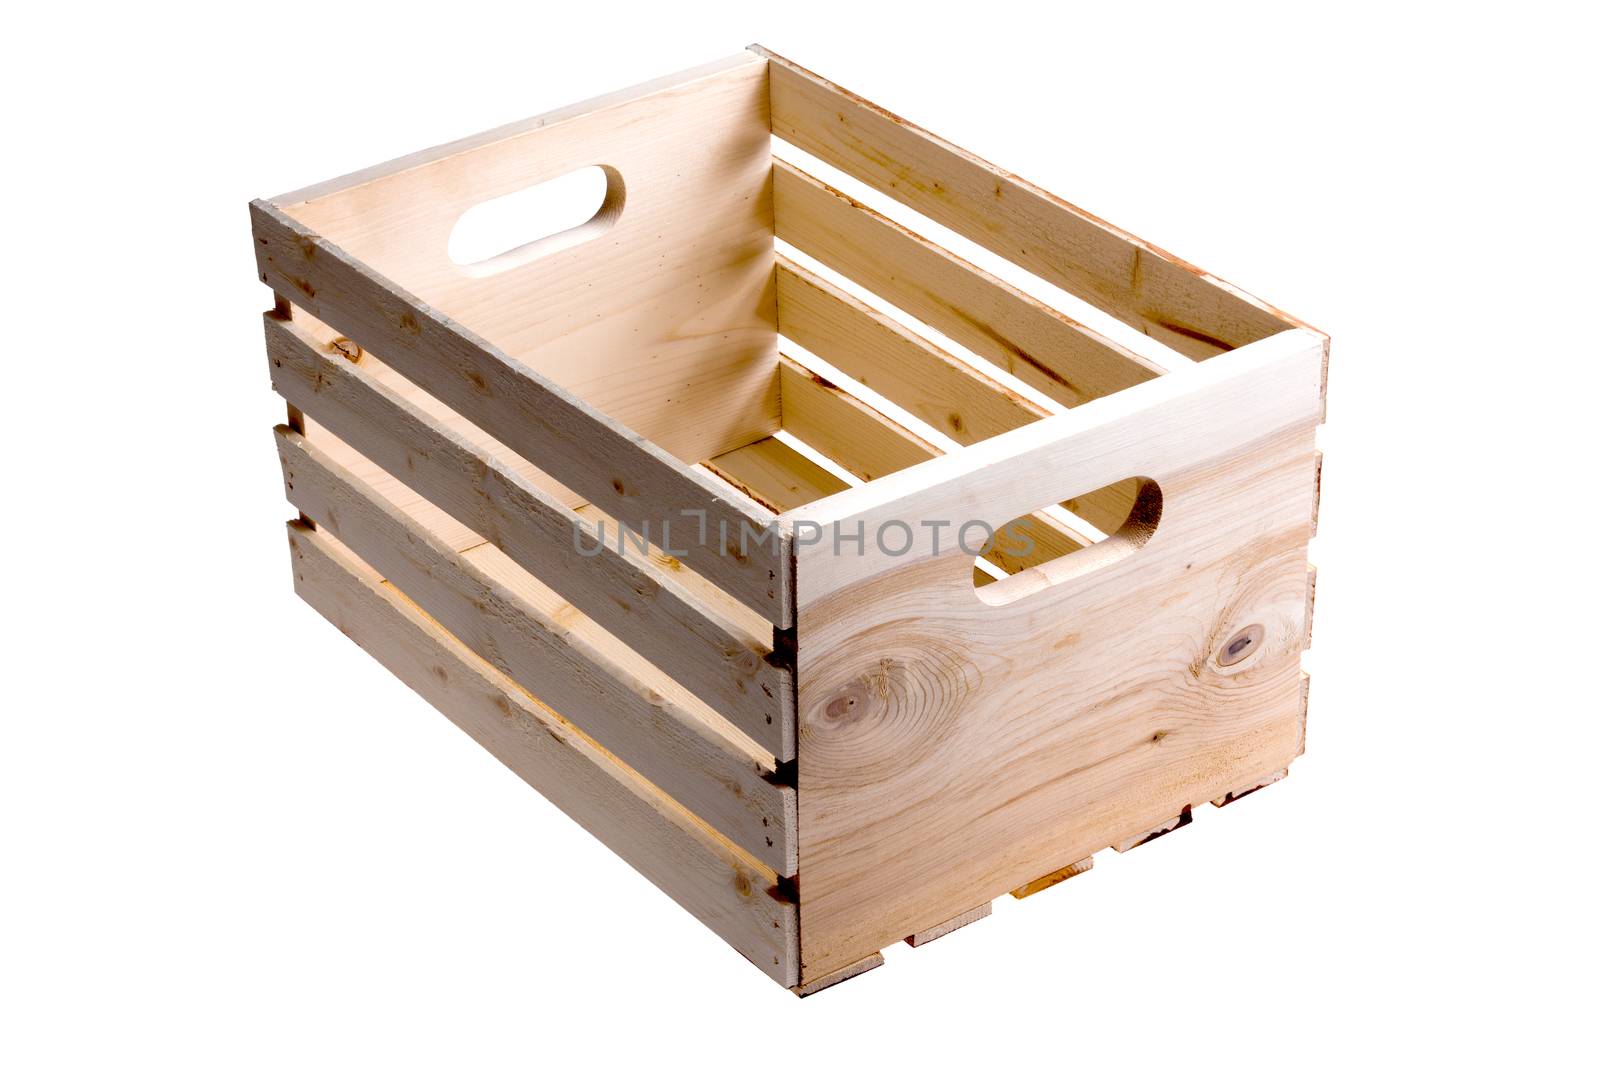 Isolated empty wooden fruit crate by coskun